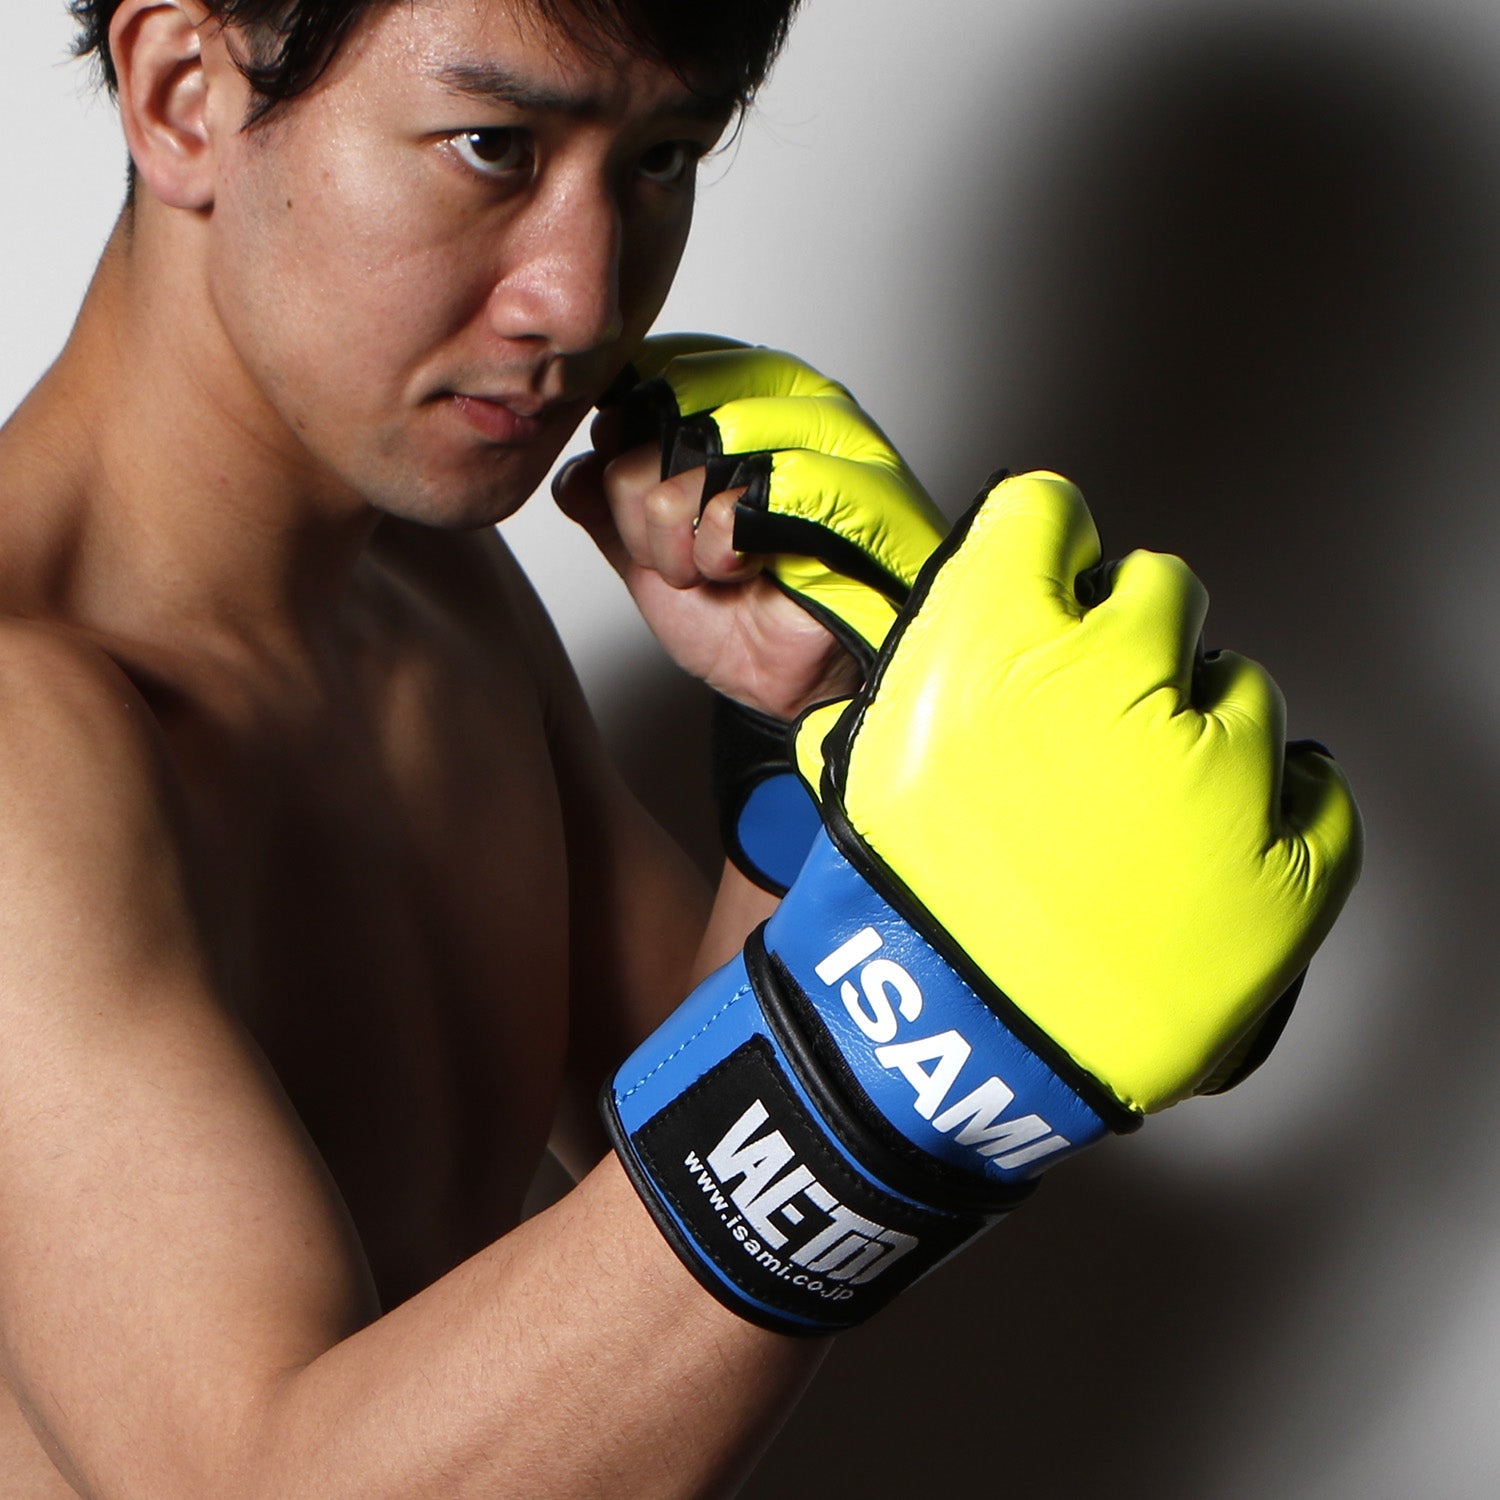 Isami Heavy Bag Punching Gloves used by UFC Fighters